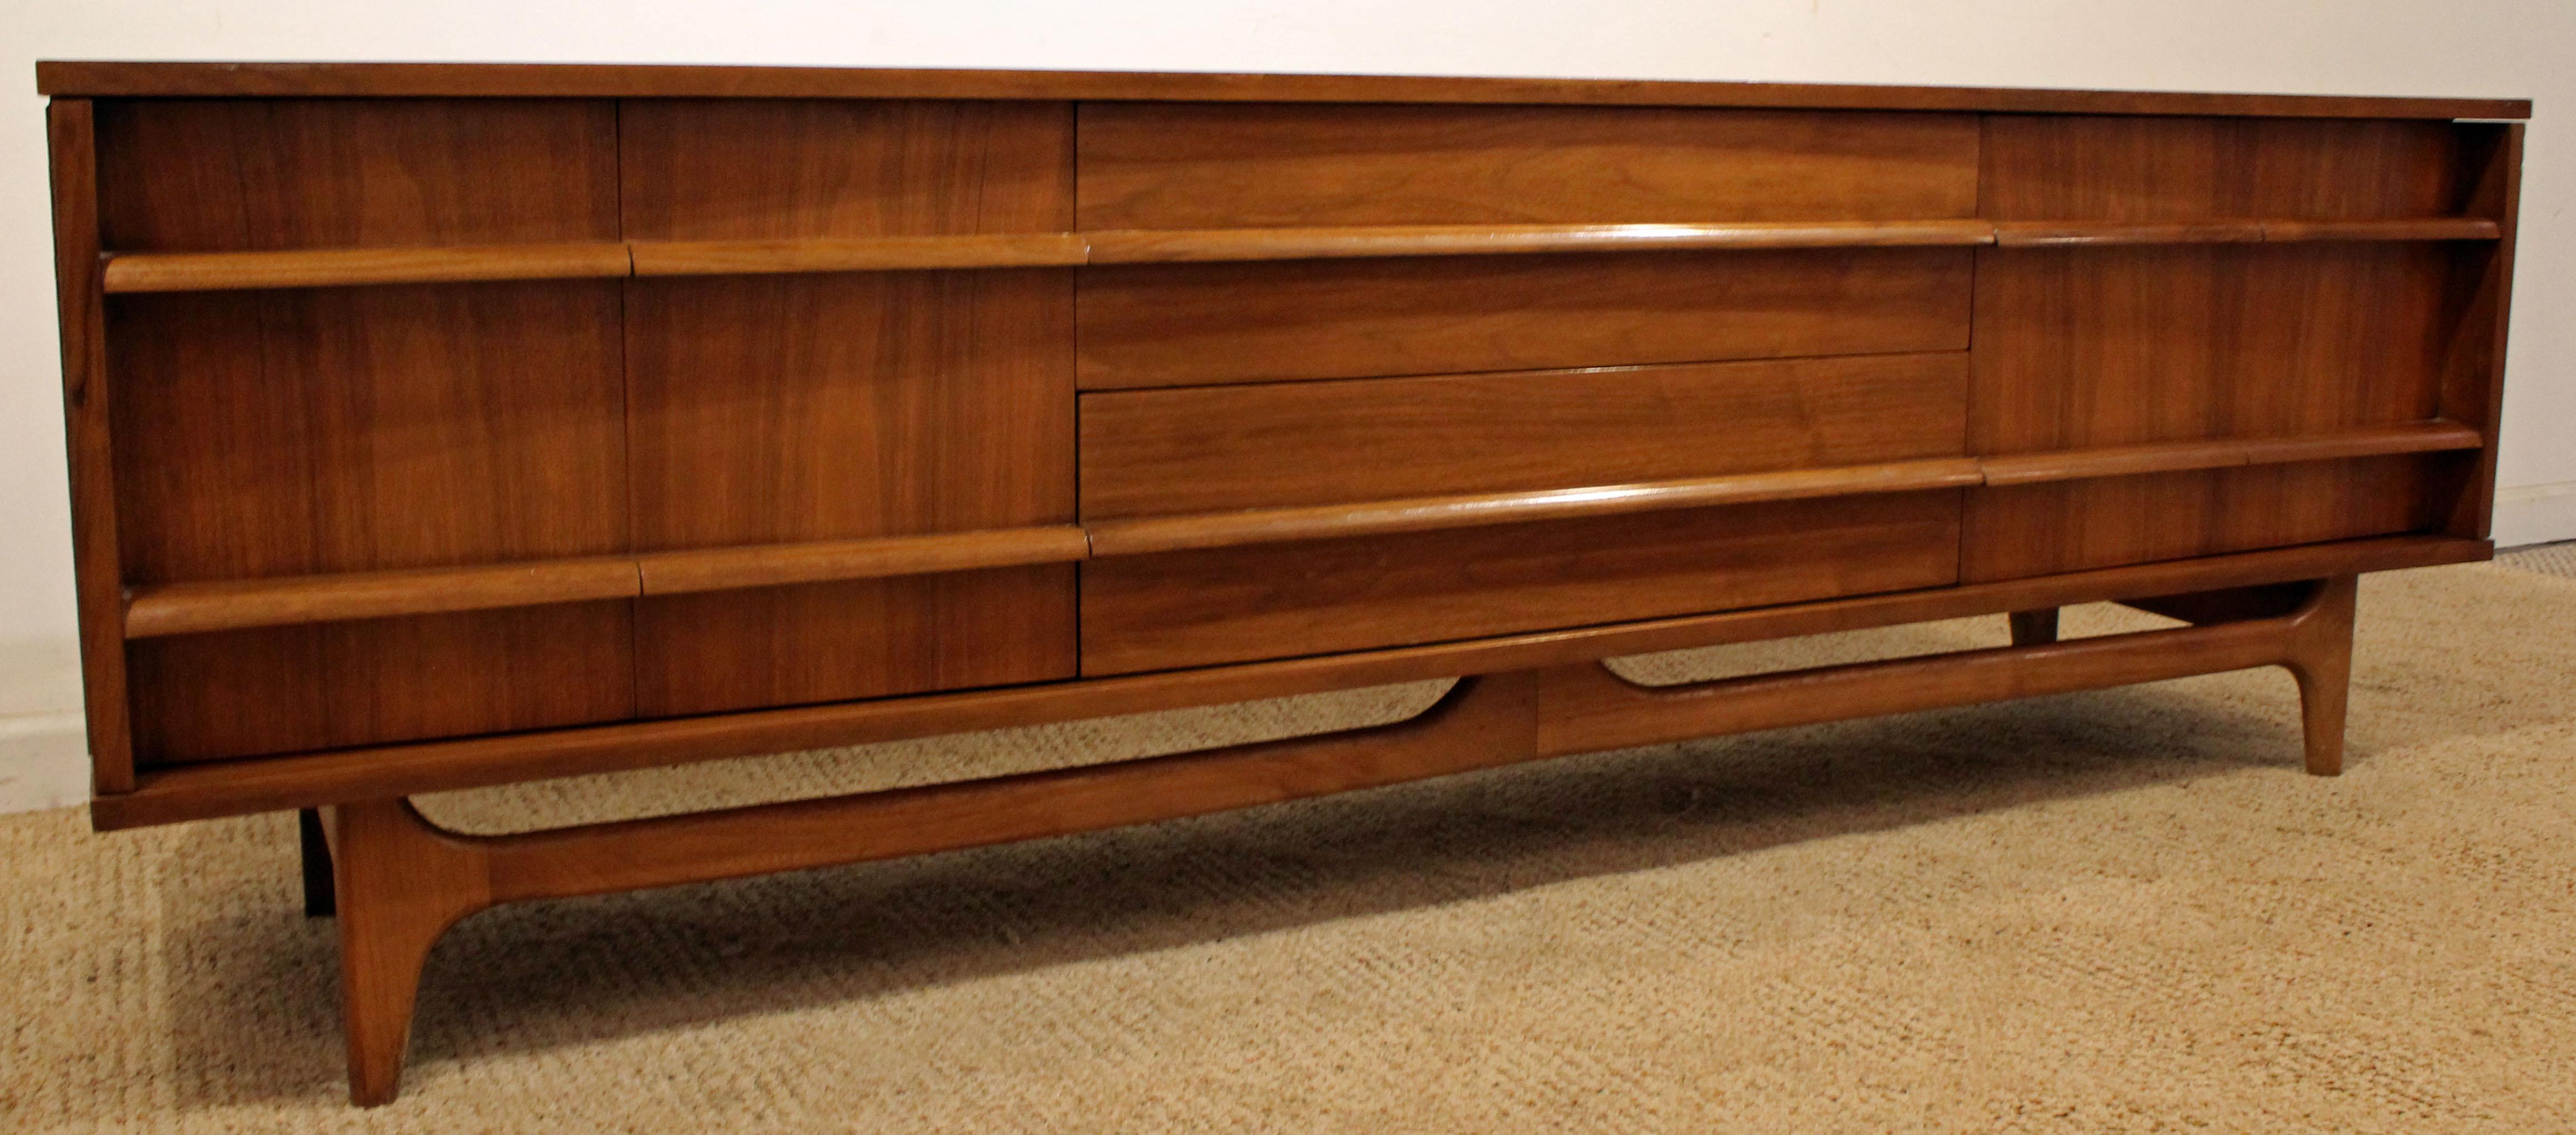 Offered is a beautiful Mid-Century Modern credenza. This piece is made of walnut, featuring a concave front, two doors on both sides and three centre drawers with sculpted pulls. The top has been refinished, shows minor age wear. It is signed by